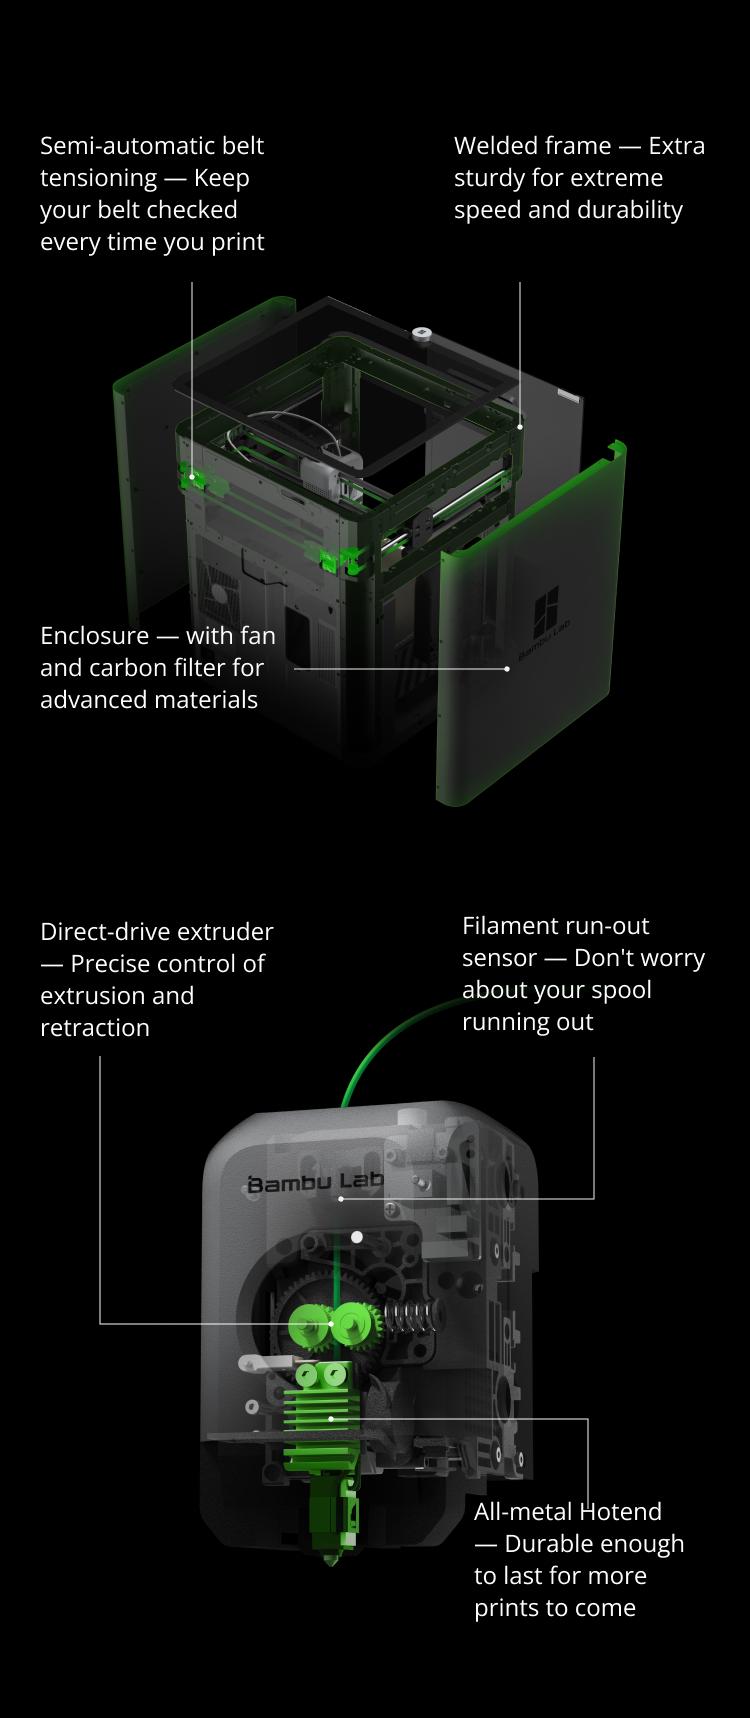 An exploded view of the Bambu Lab X1 Carbon 3D printer, with key features highlighted.